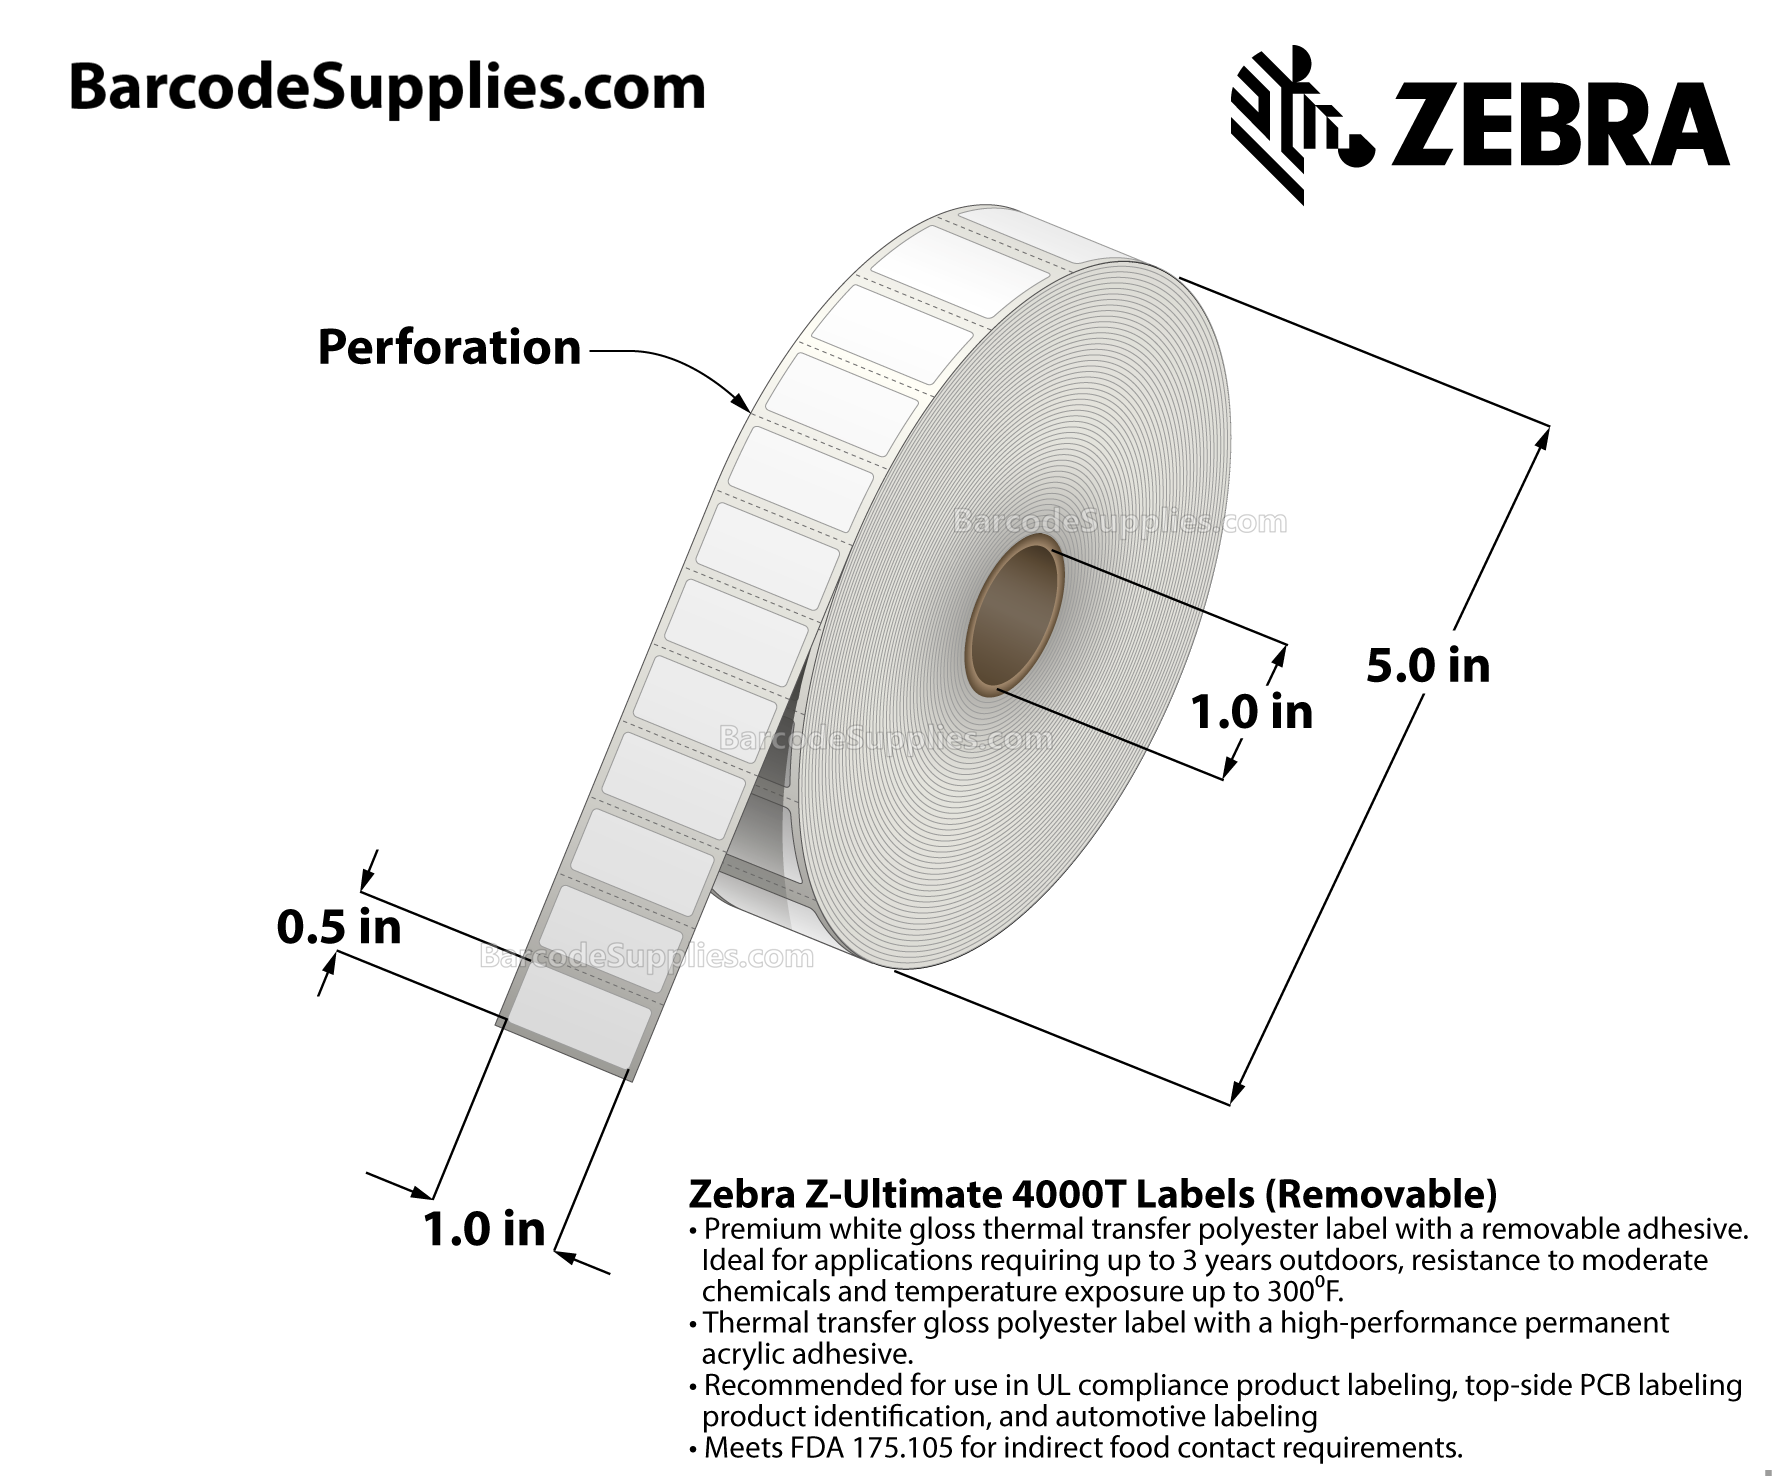 Products 1 x 0.5 Thermal Transfer White Z-Ultimate 4000T Removable Labels With Removable Adhesive - Perforated - 2500 Labels Per Roll - Carton Of 1 Rolls - 2500 Labels Total - MPN: 10023067